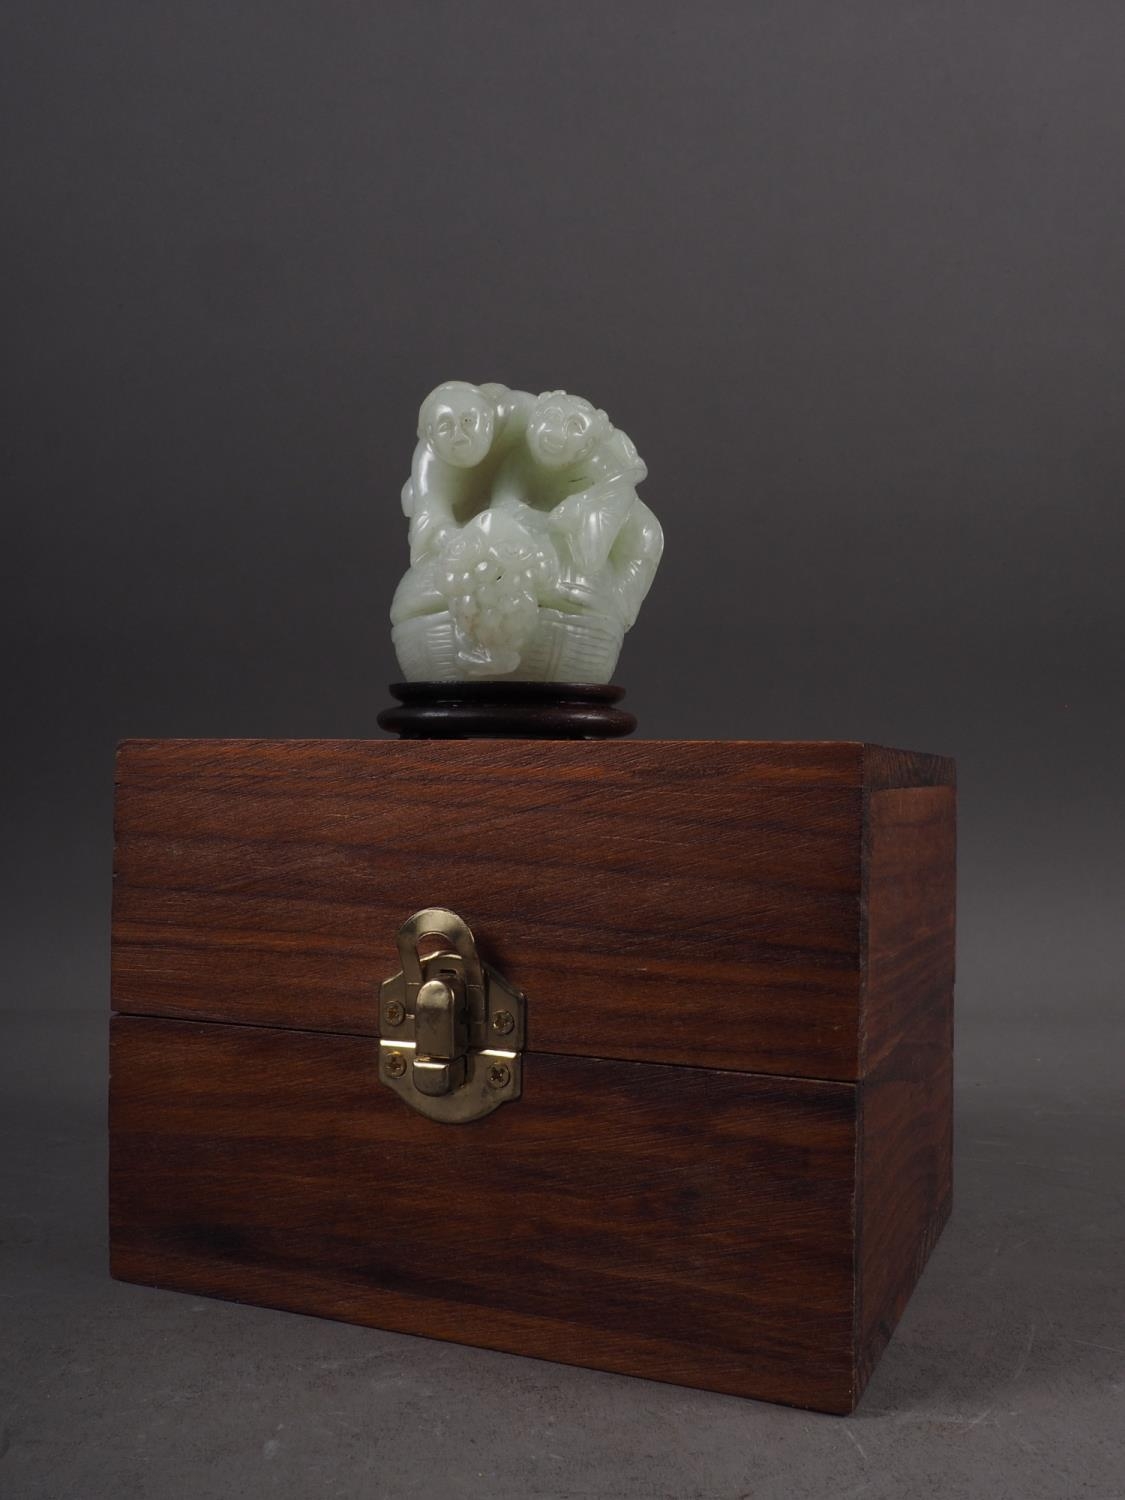 A Chinese carved pale jade figure group, 2 1/2" high, on stand, in a hardwood hinged box